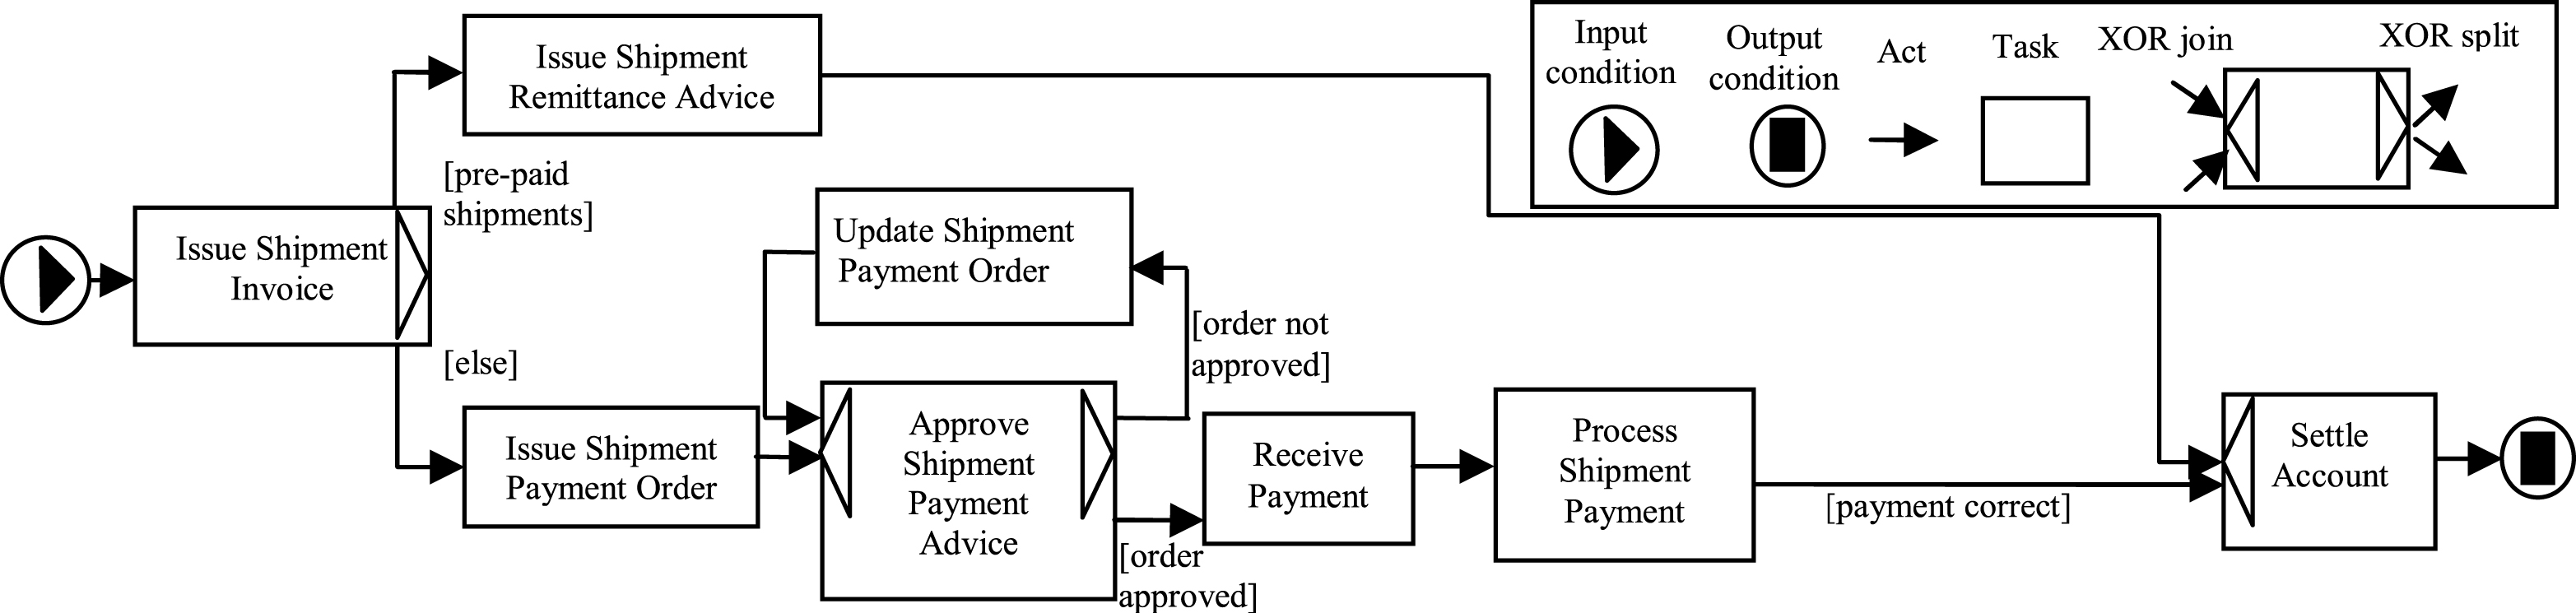 Example of an order fulfillment process.